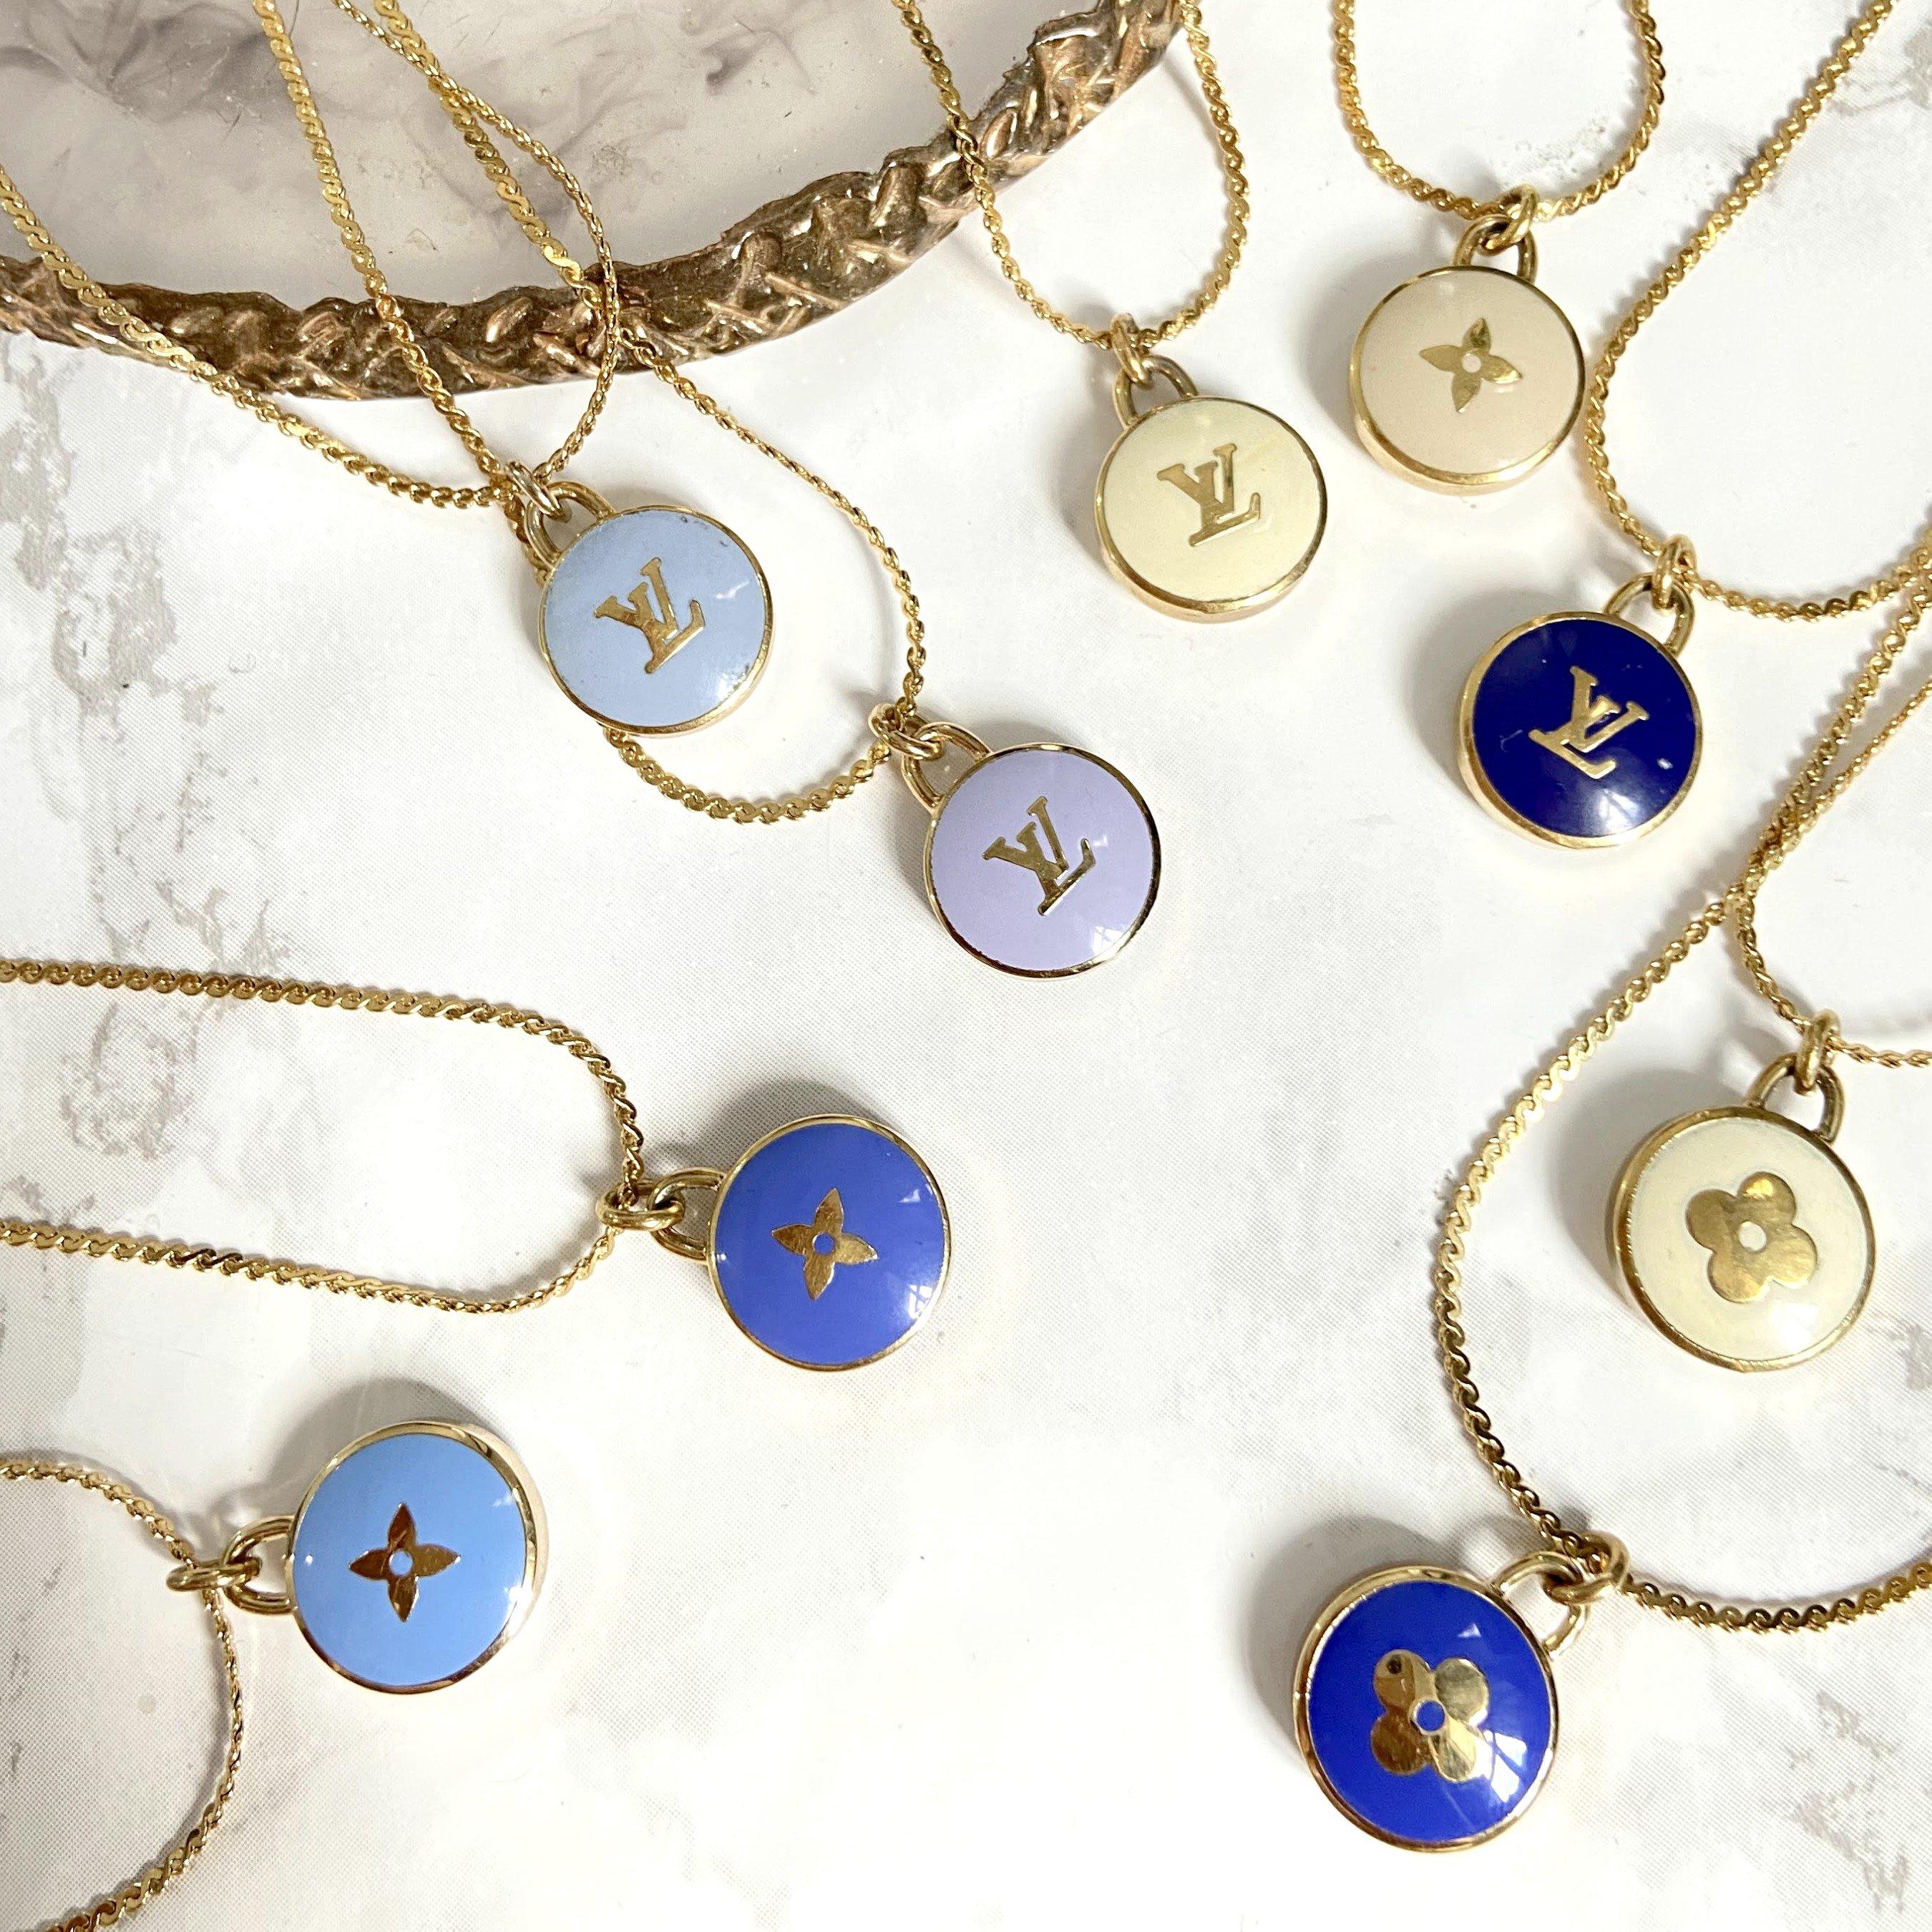 Louis Vuitton charms x 2 (two) Individual re purposed Charms, blue cord  necklace